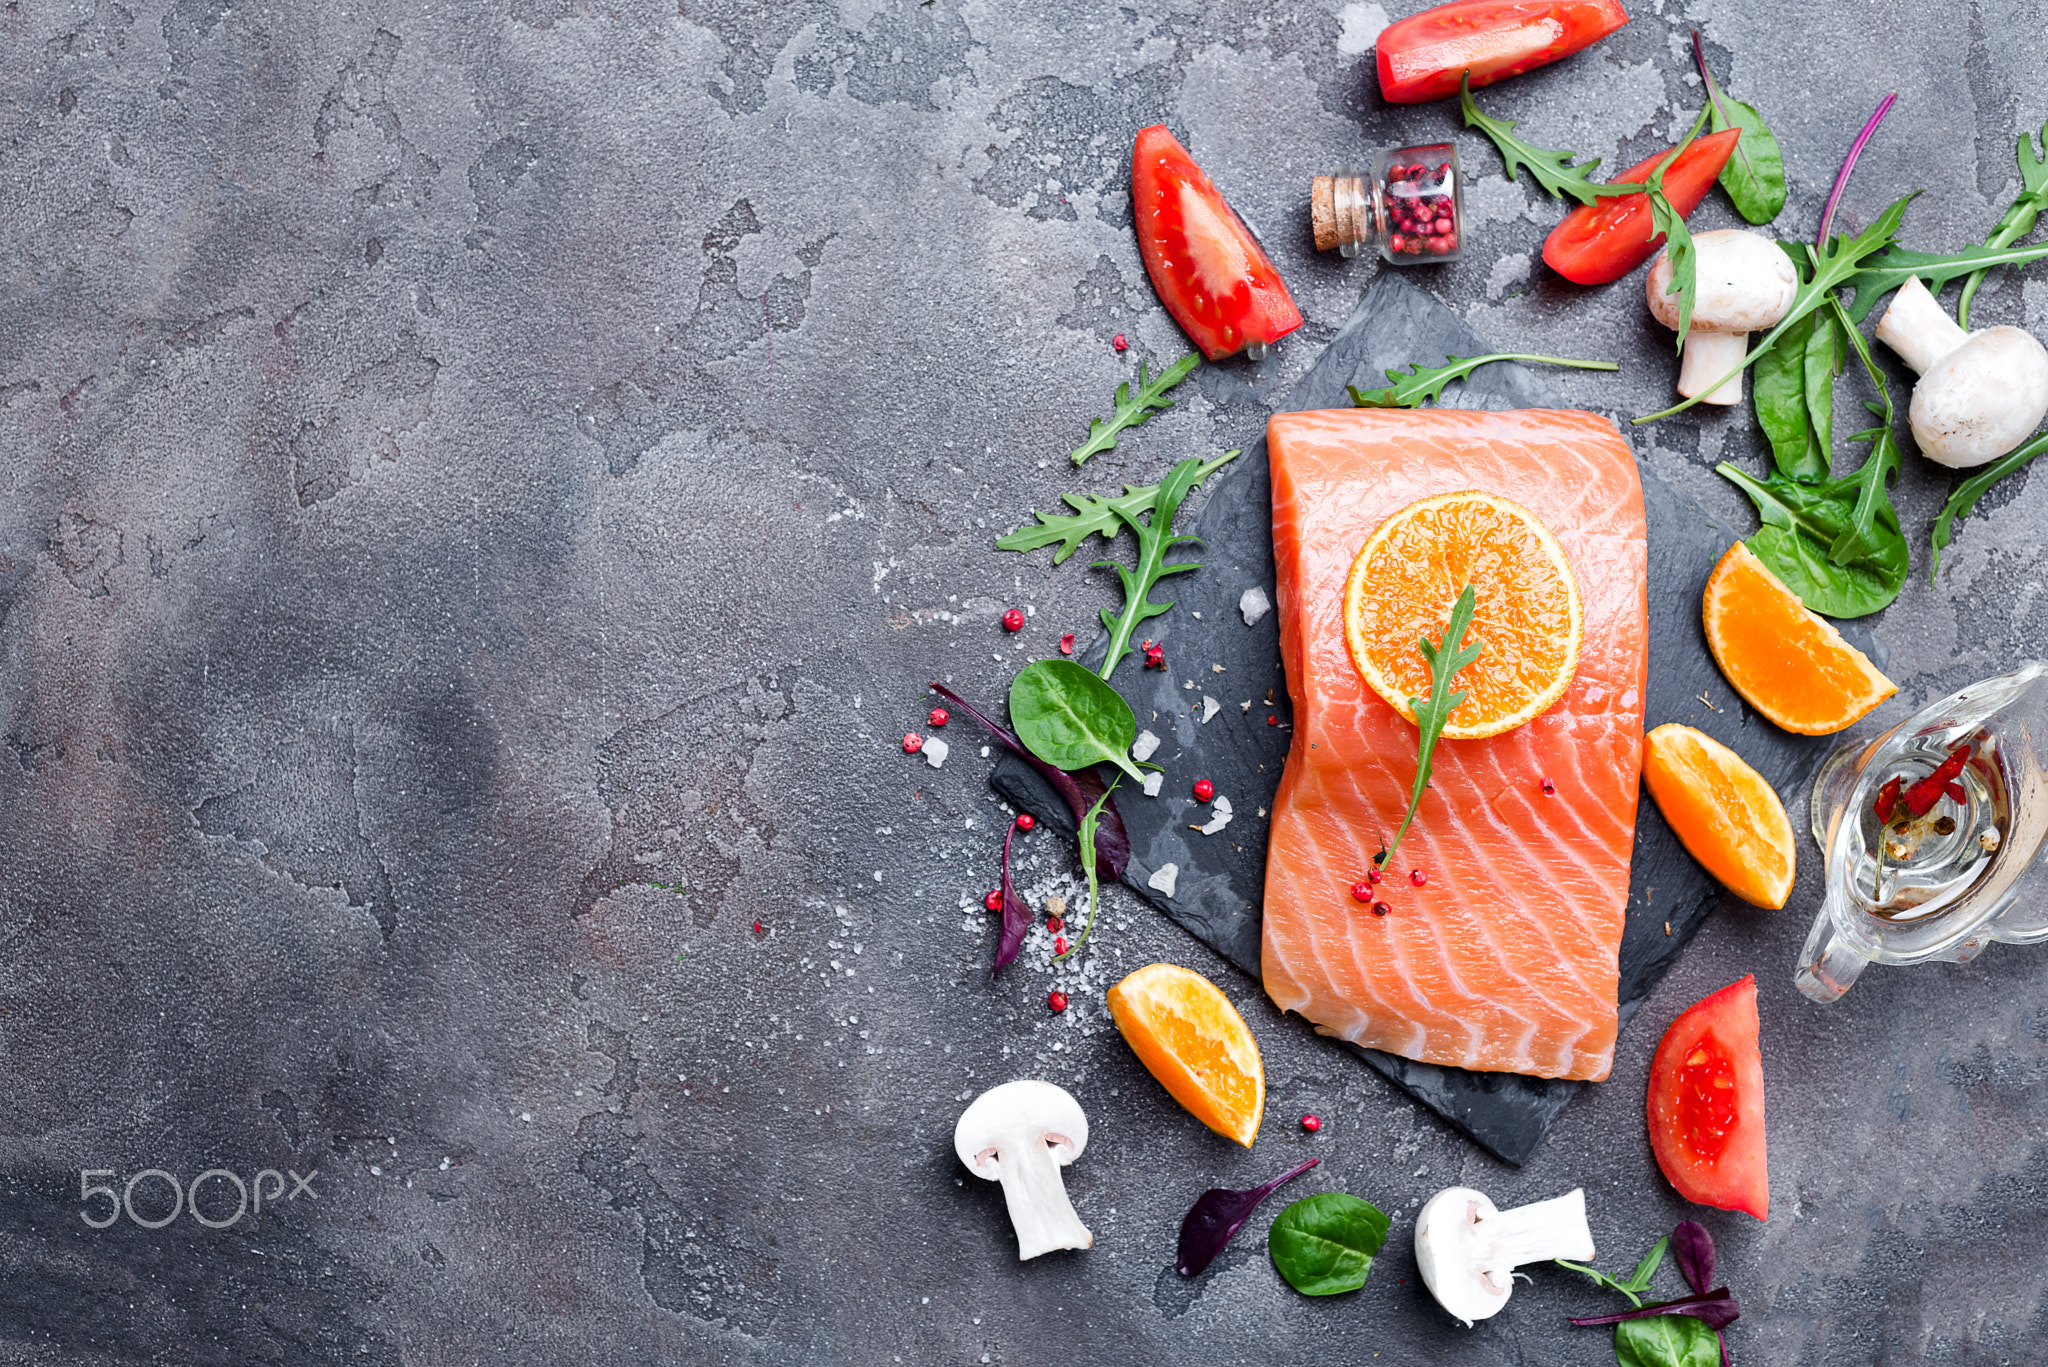 Salmon fillet with fresh ingredients